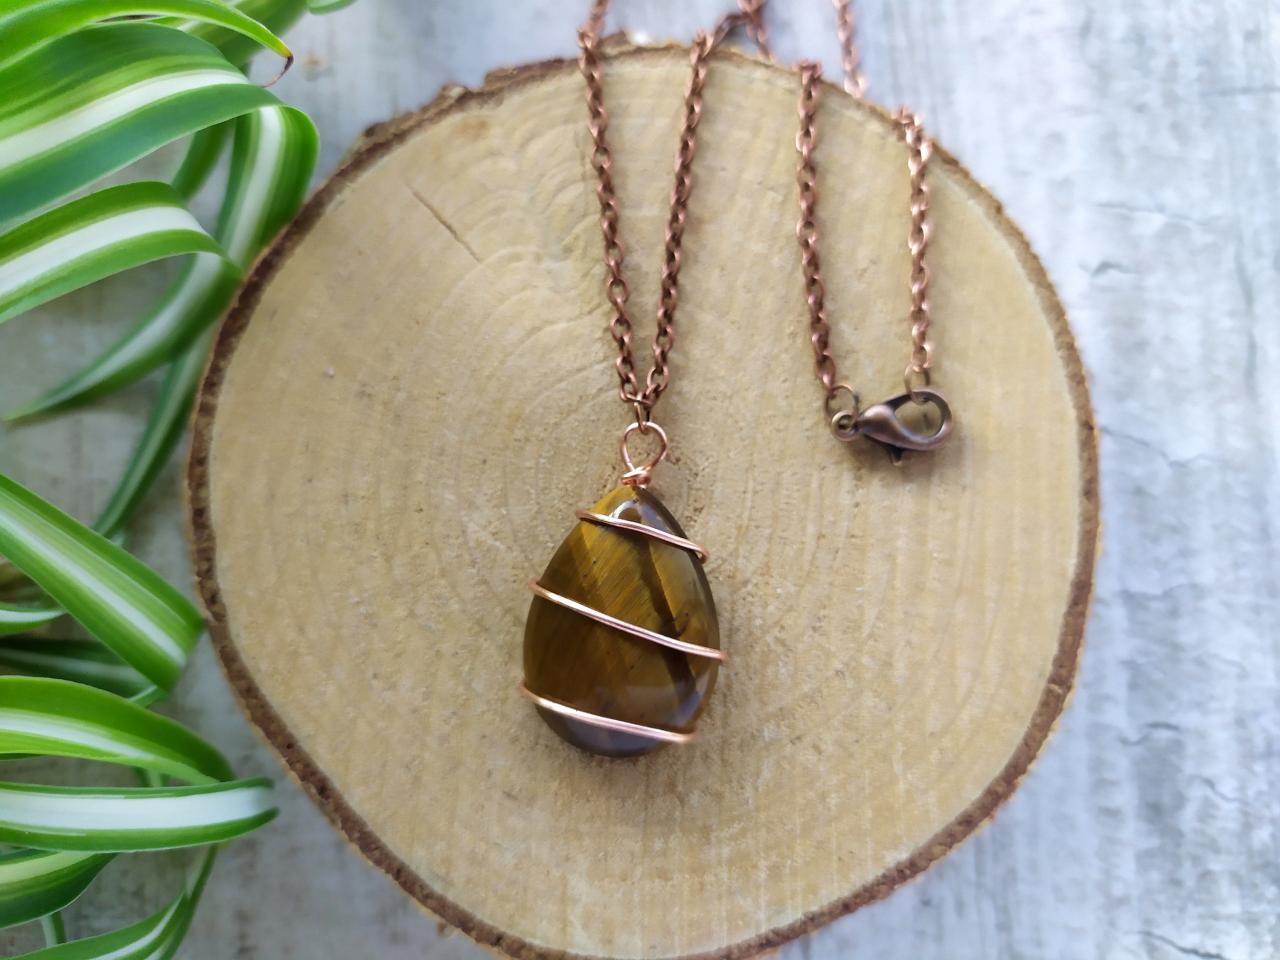 Wire Wrapped Brown Tiger's Eye Gemstone Necklace, Tigers Eye Pendant, Teardrop Shaped Crystal Pendant, Brown Gold Dainty Gemstone